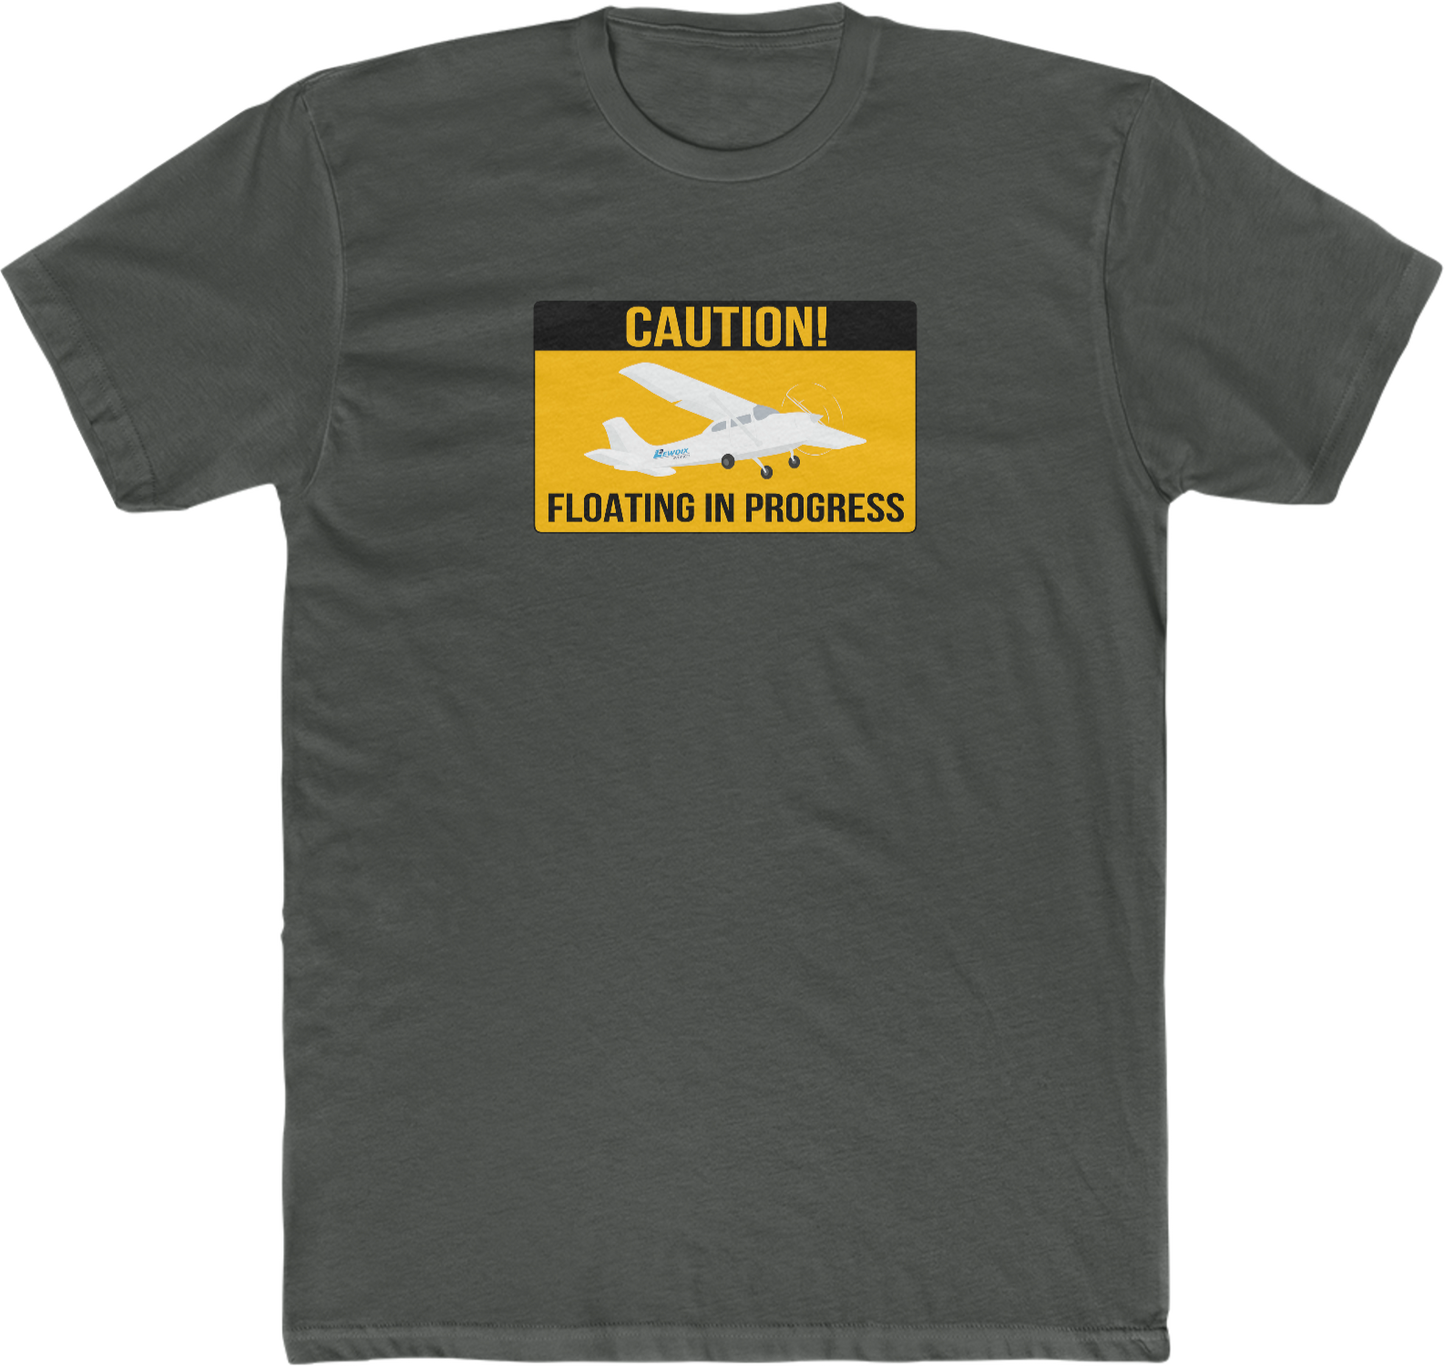 Caution! Floating In Progress T-shirt